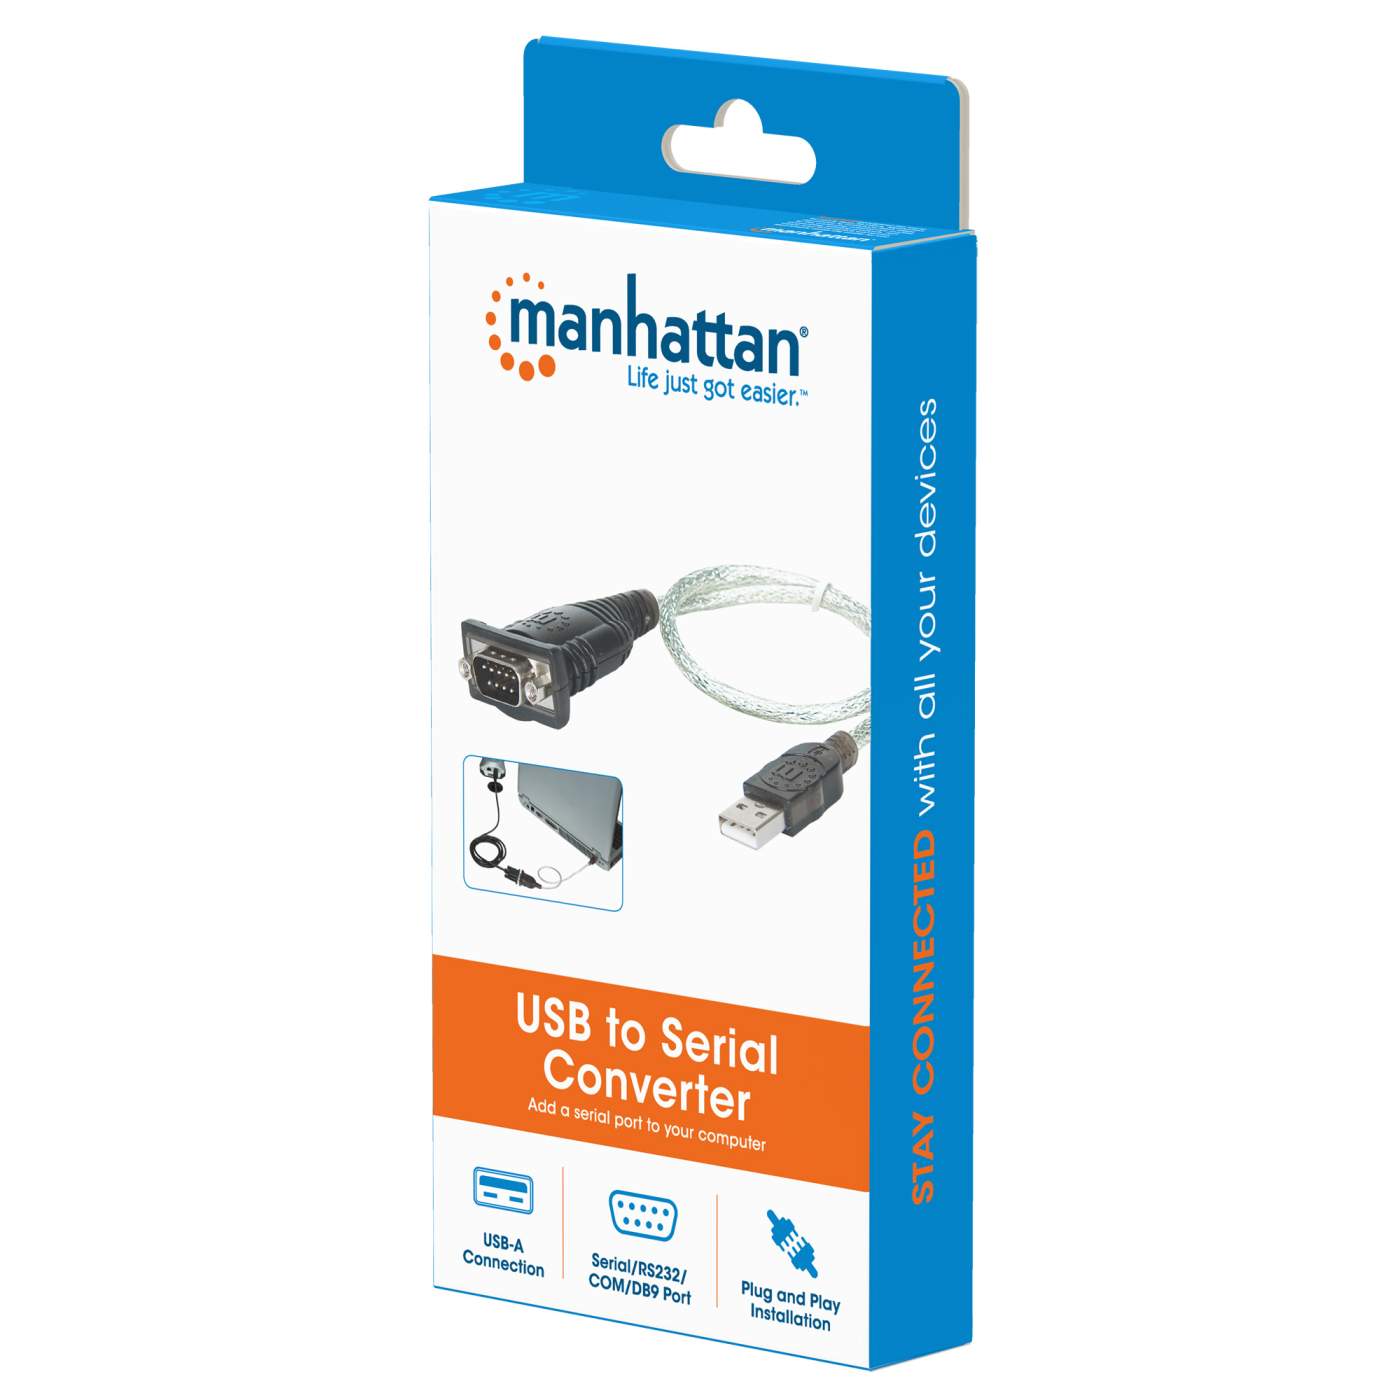 USB to Serial Converter Packaging Image 2